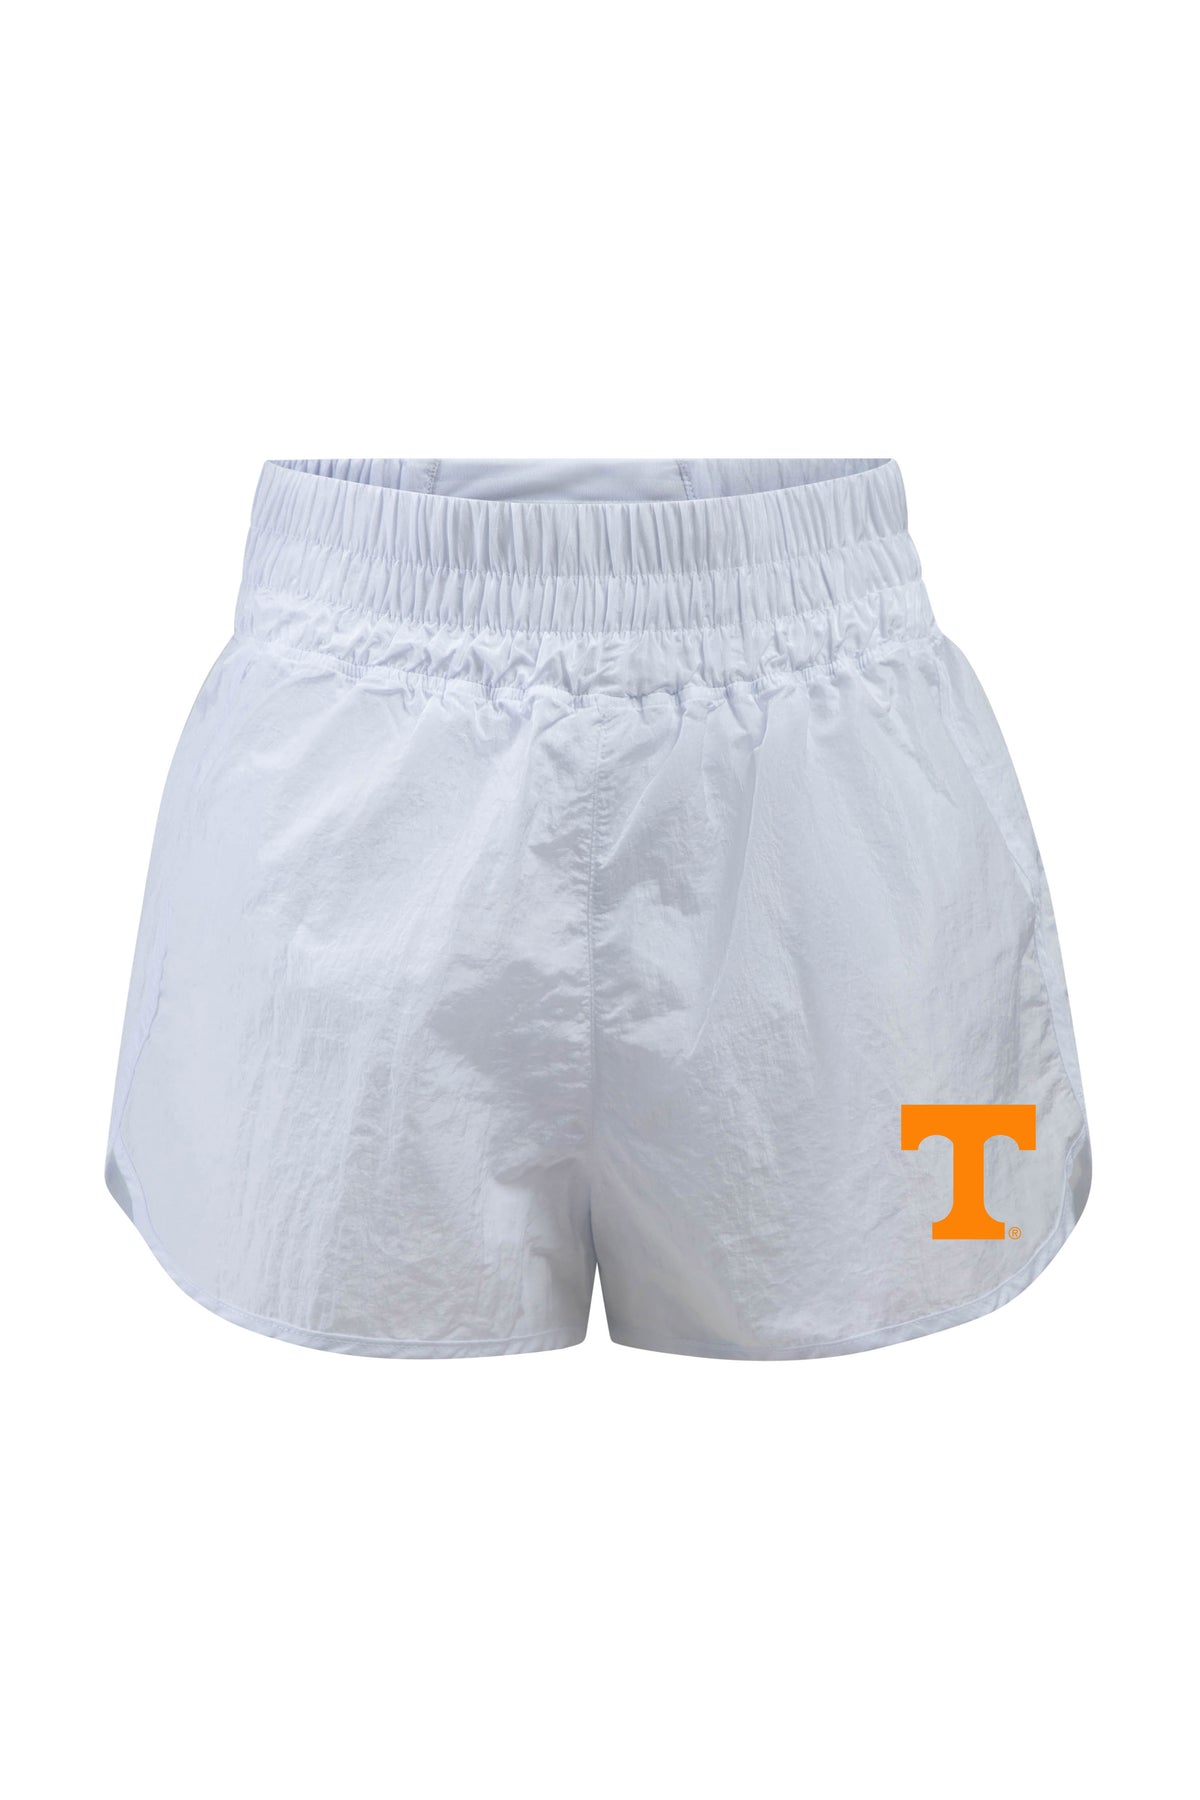 University of Tennessee Boxer Short